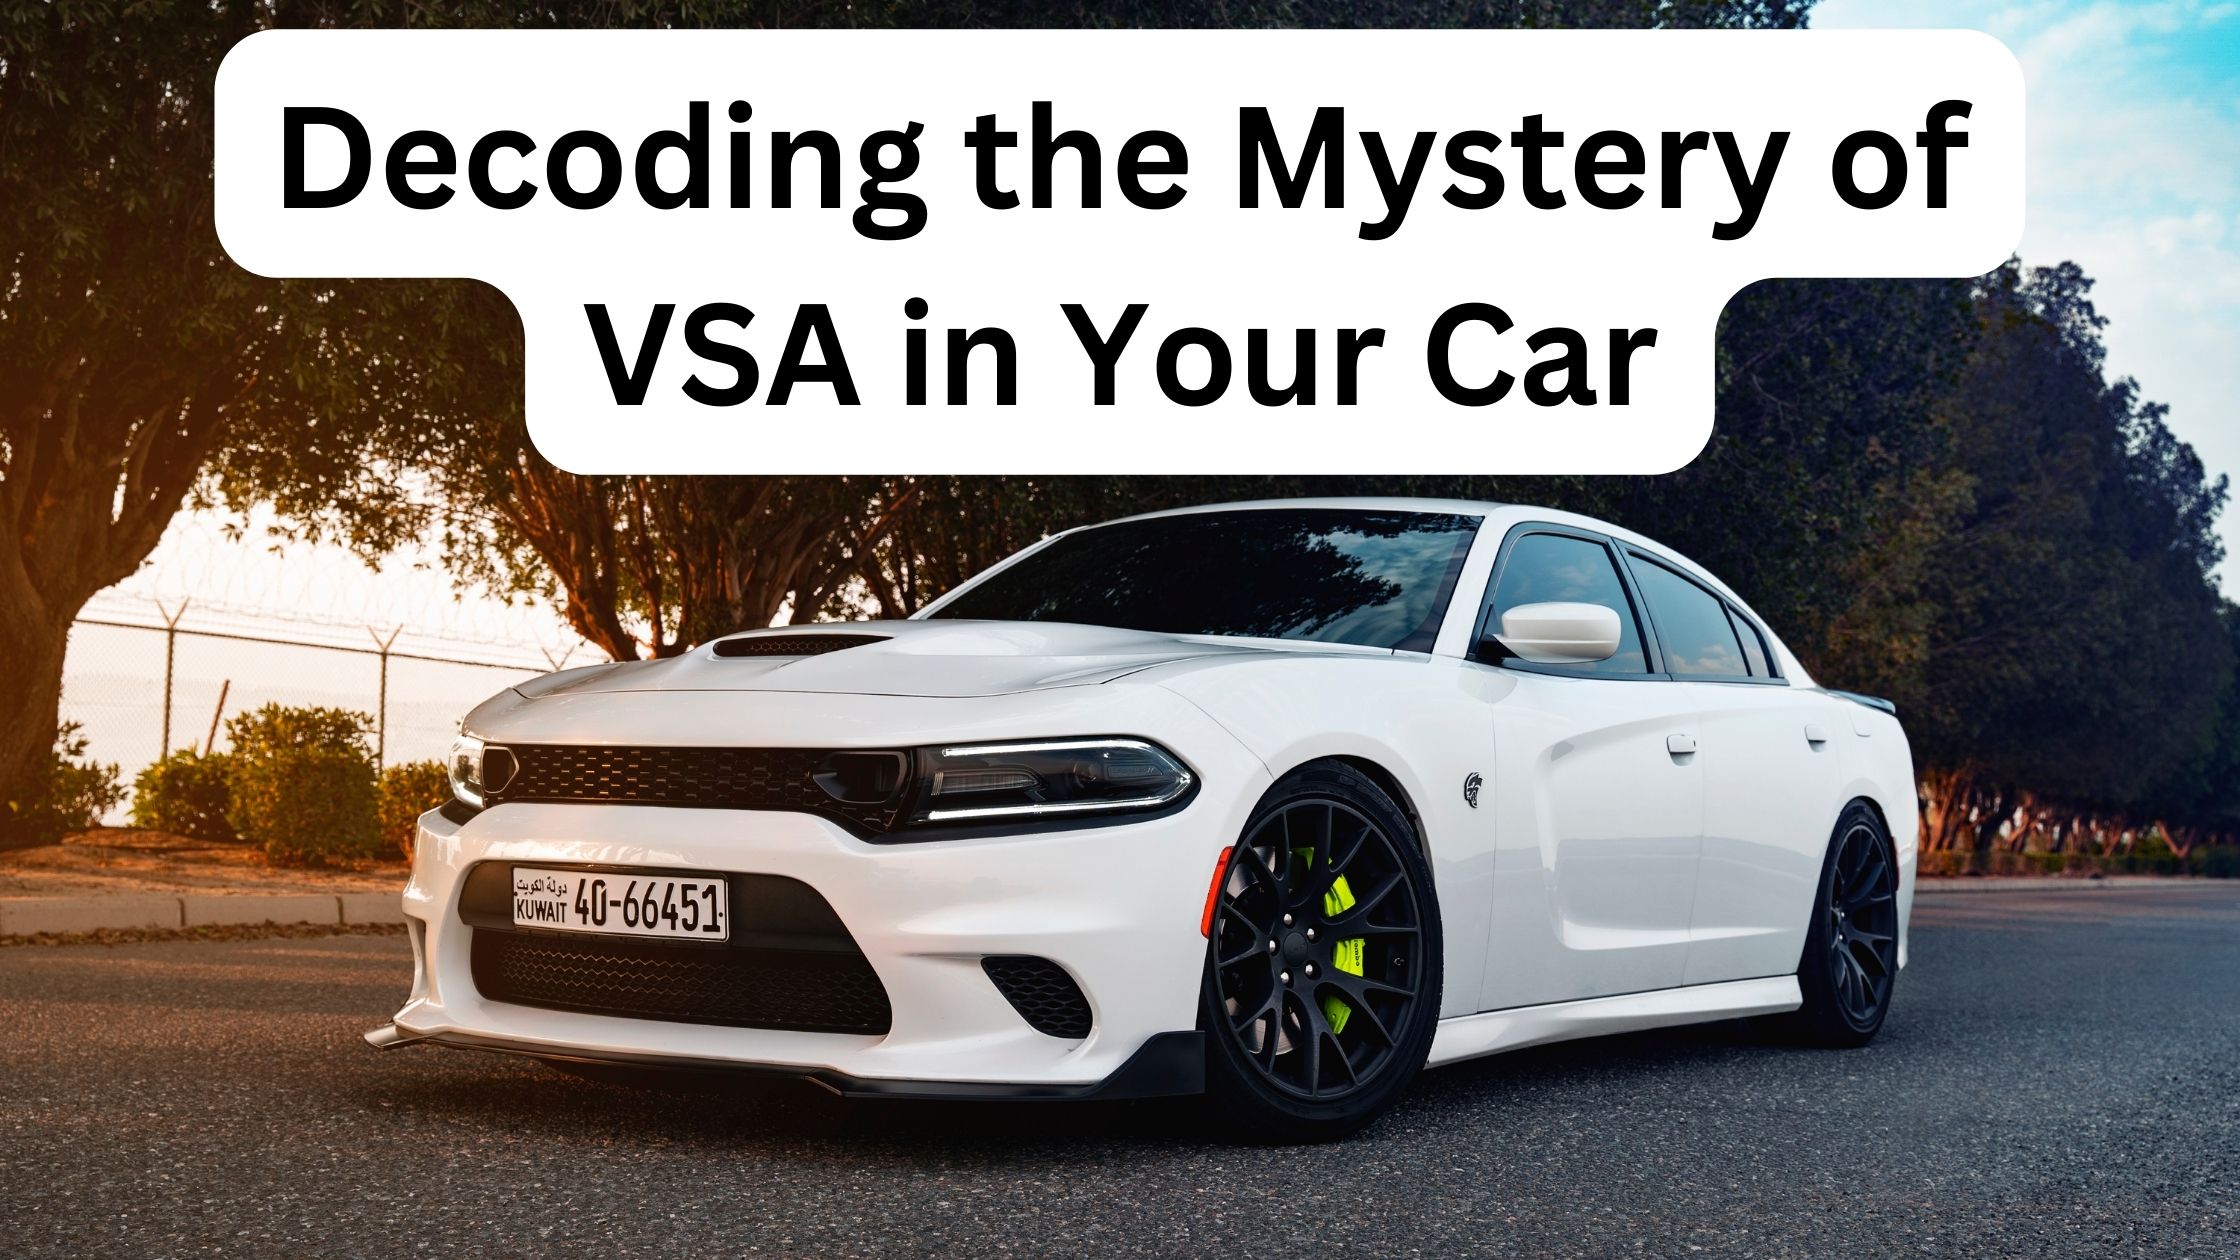 Decoding the Mystery of VSA in Your Car